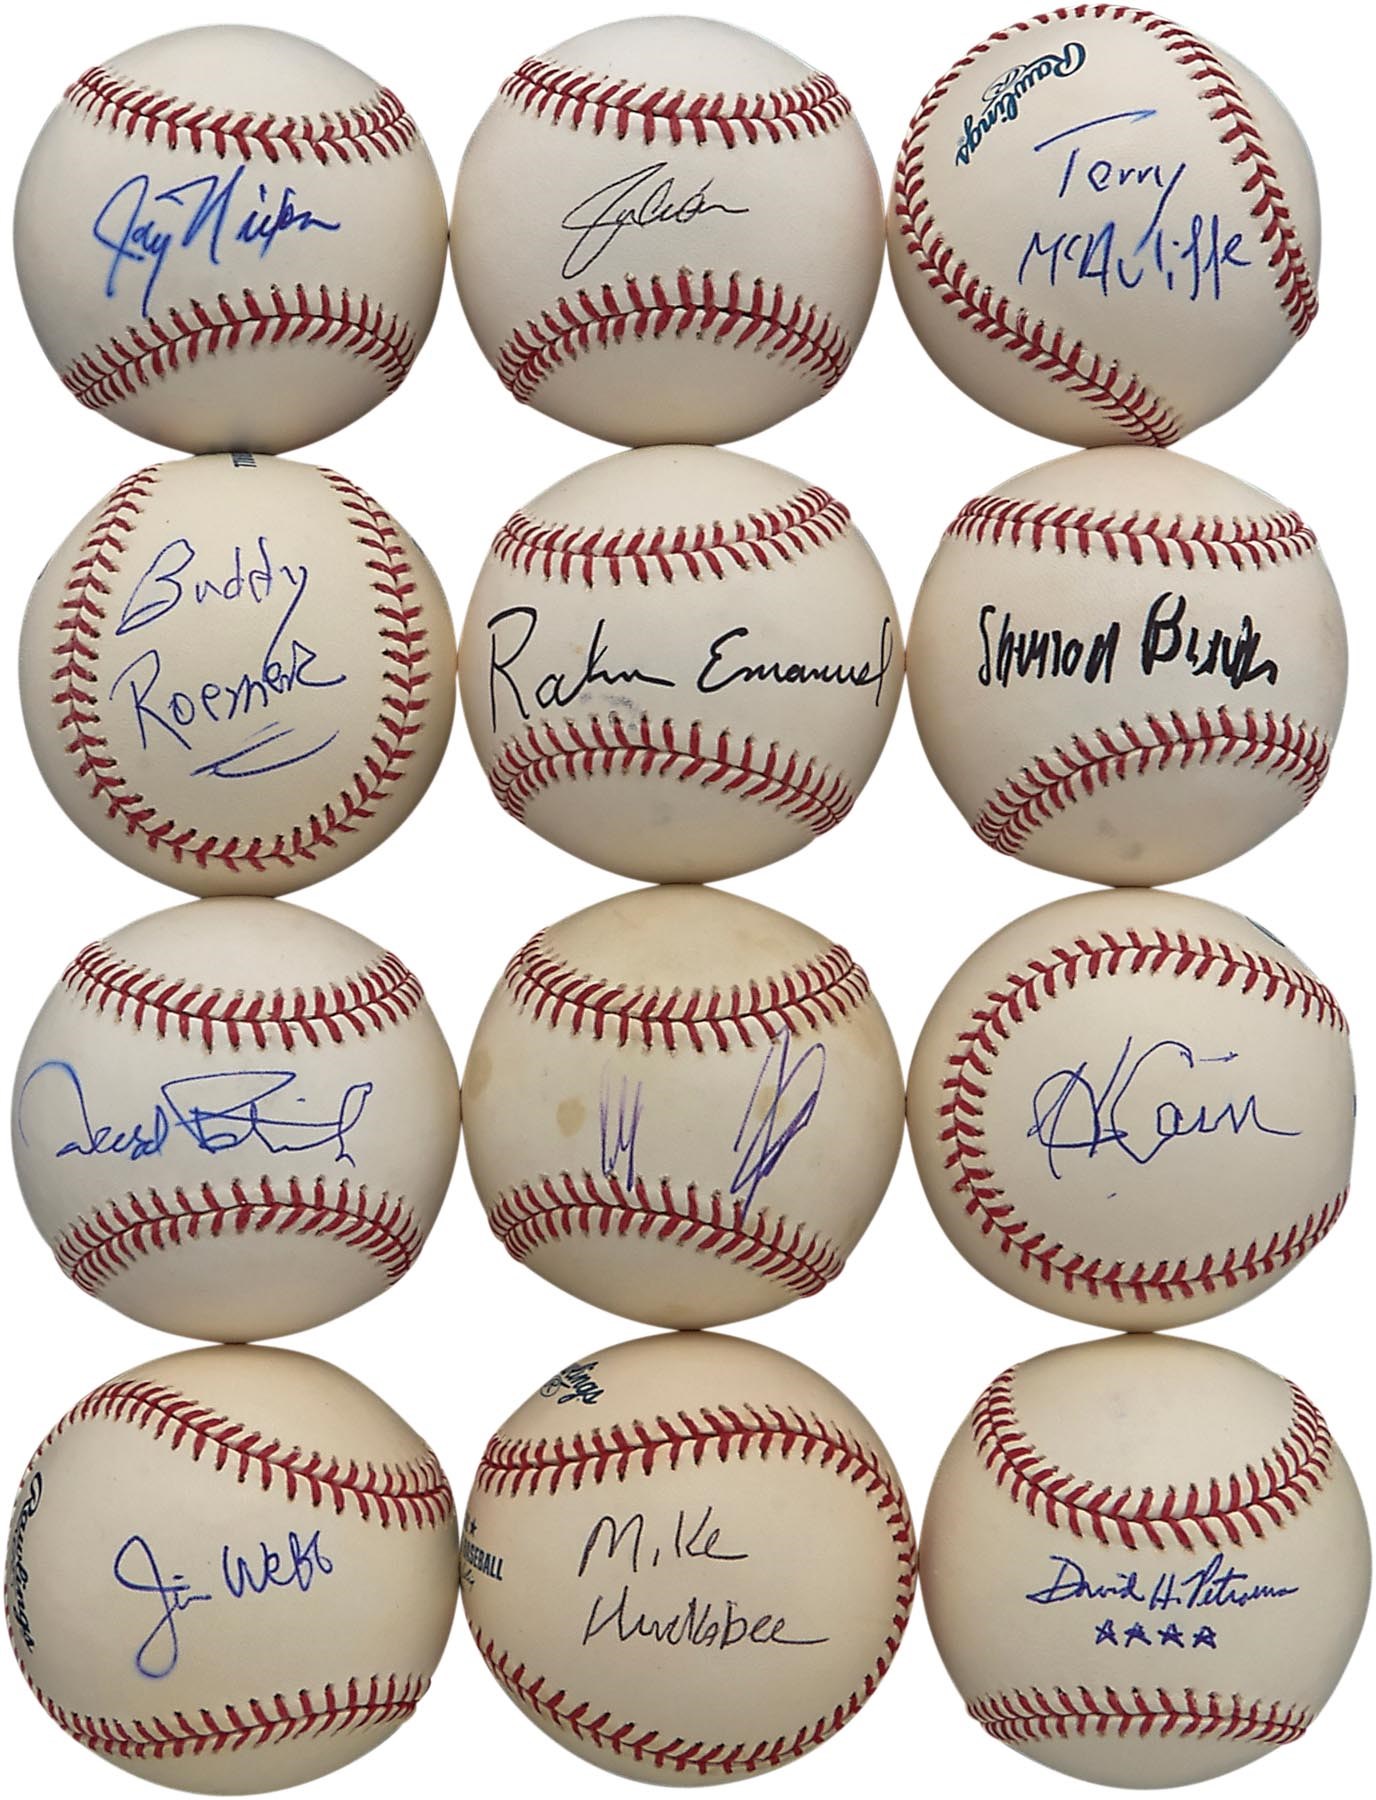 Baseball Autographs - Heads of State & Major Political Figures Signed Baseballs From The Legendary Kaplan Collection (78)